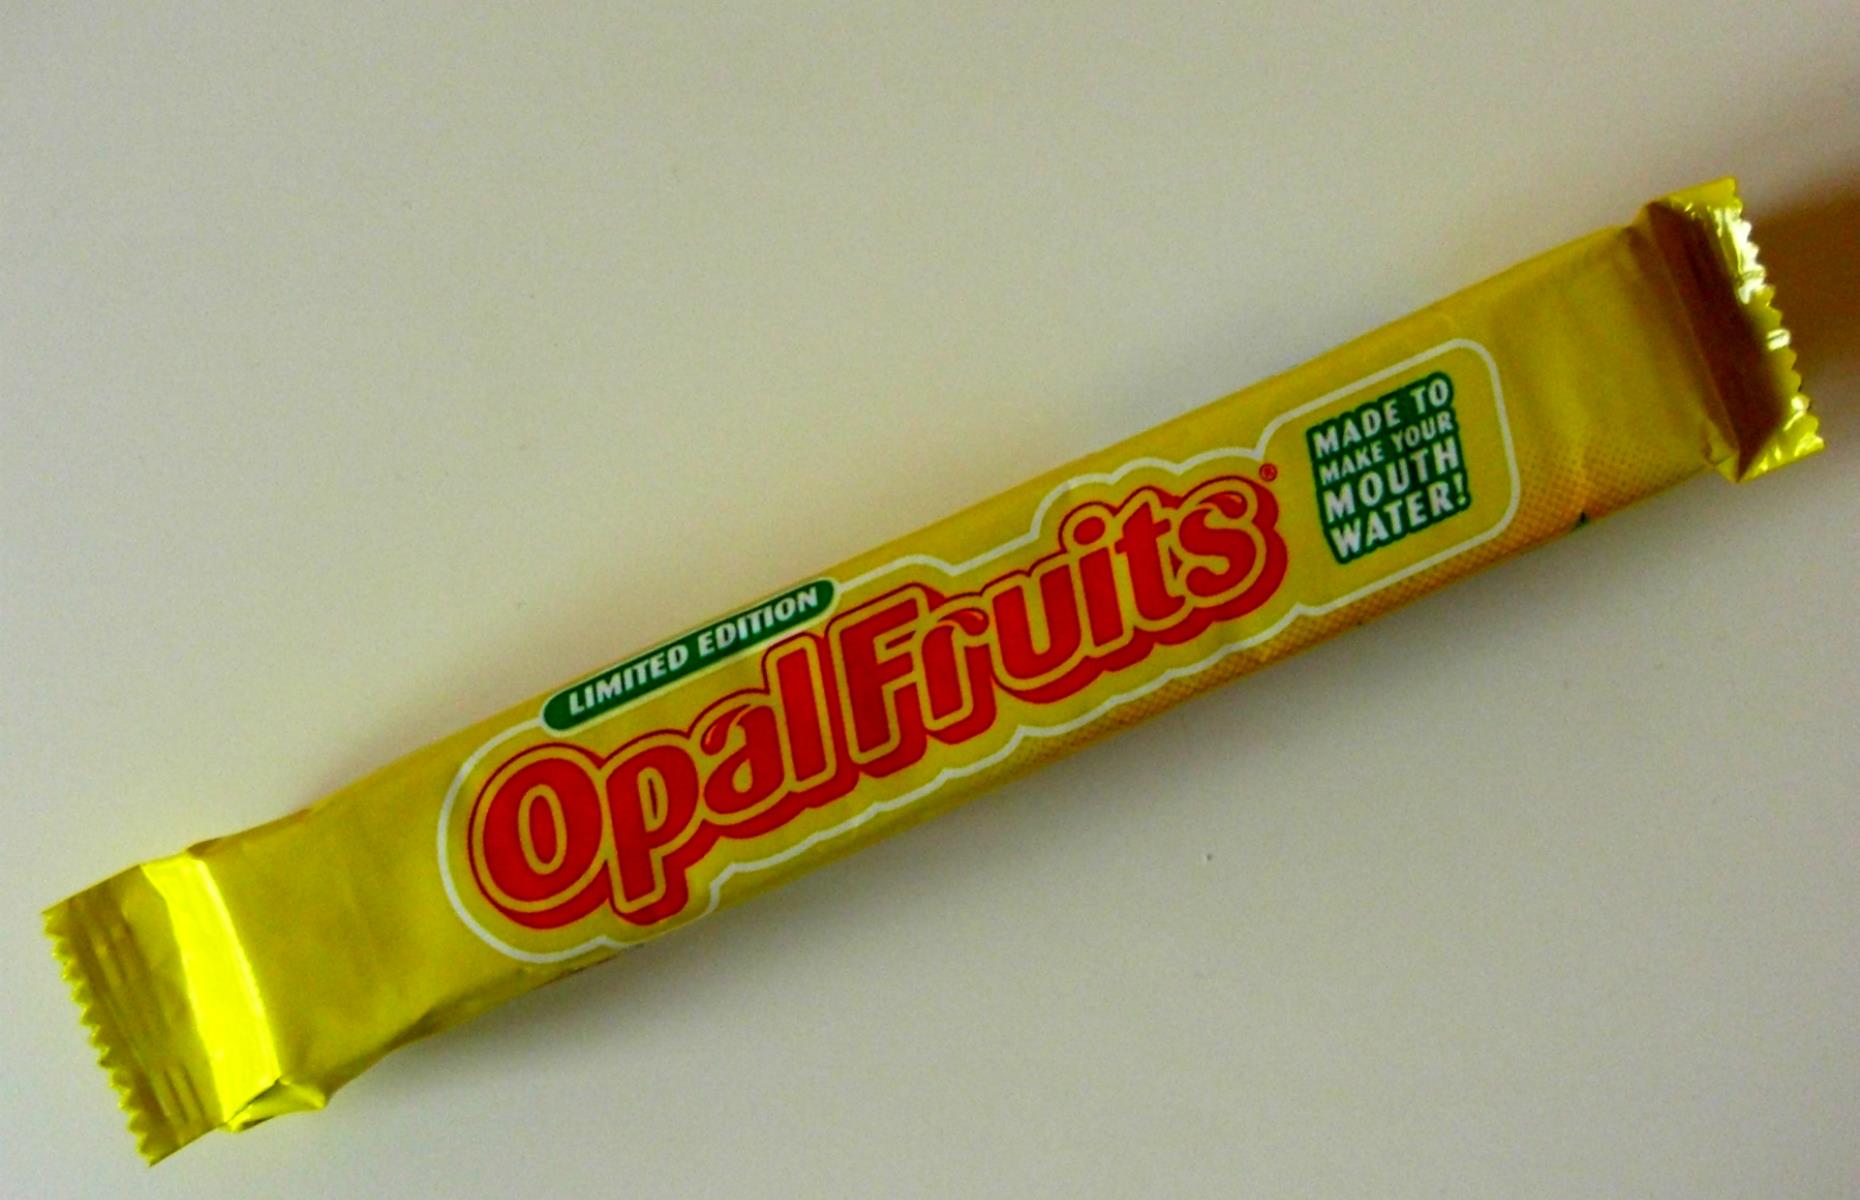 Starburst, formerly Opal Fruits in the UK